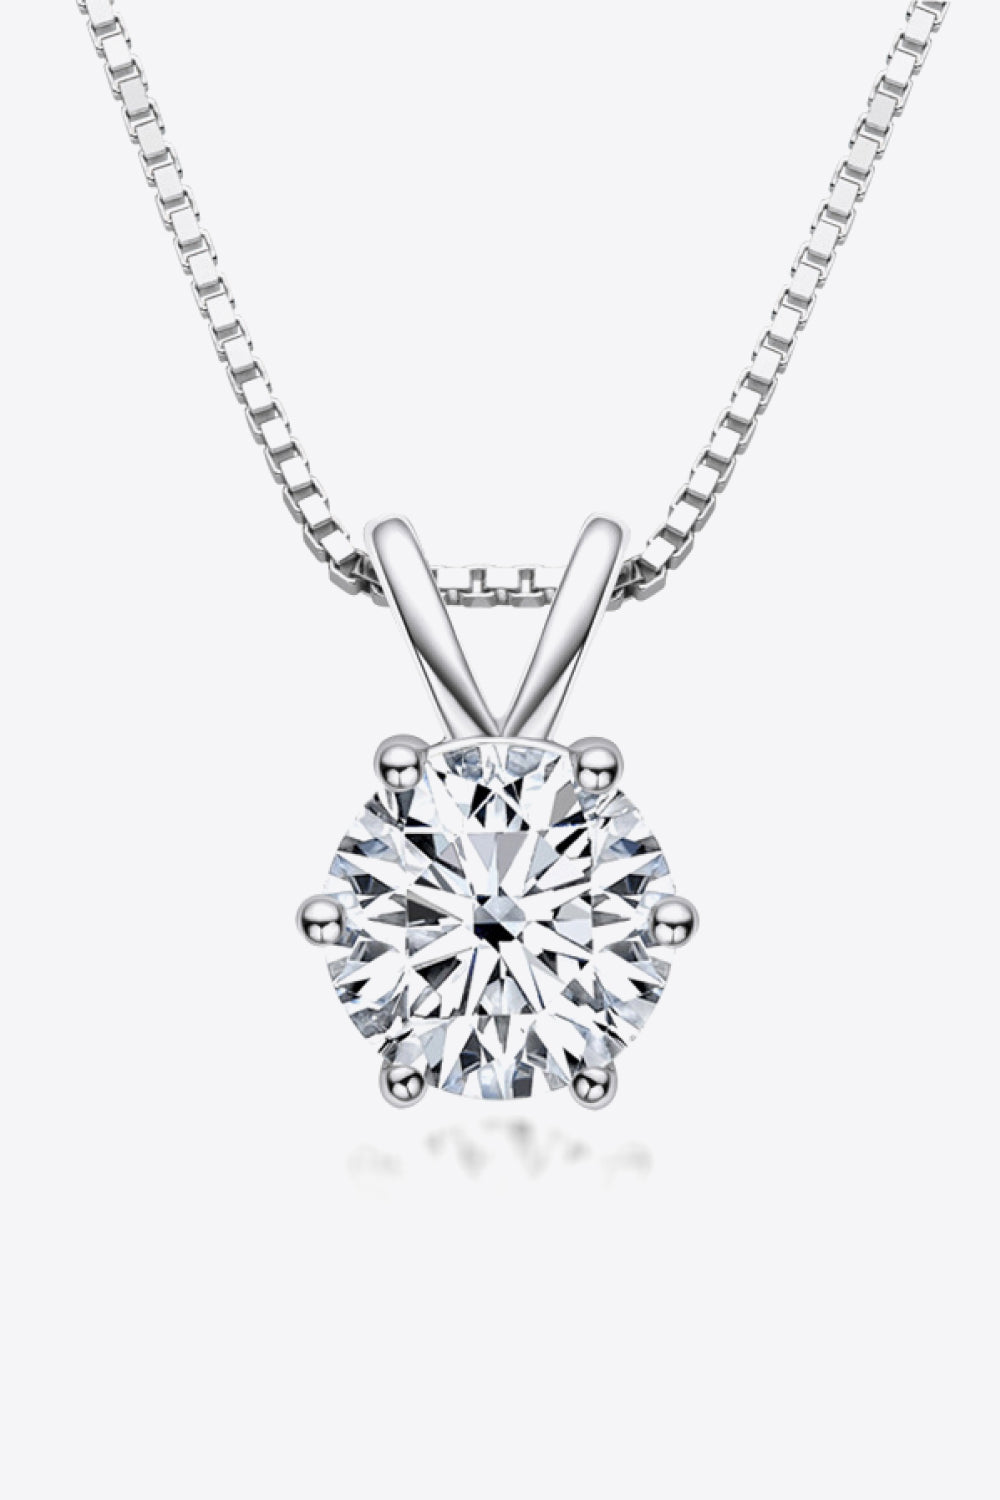 925 Sterling Silver 1 Carat Moissanite Pendant Necklace-Necklaces-Inspired by Justeen-Women's Clothing Boutique in Chicago, Illinois